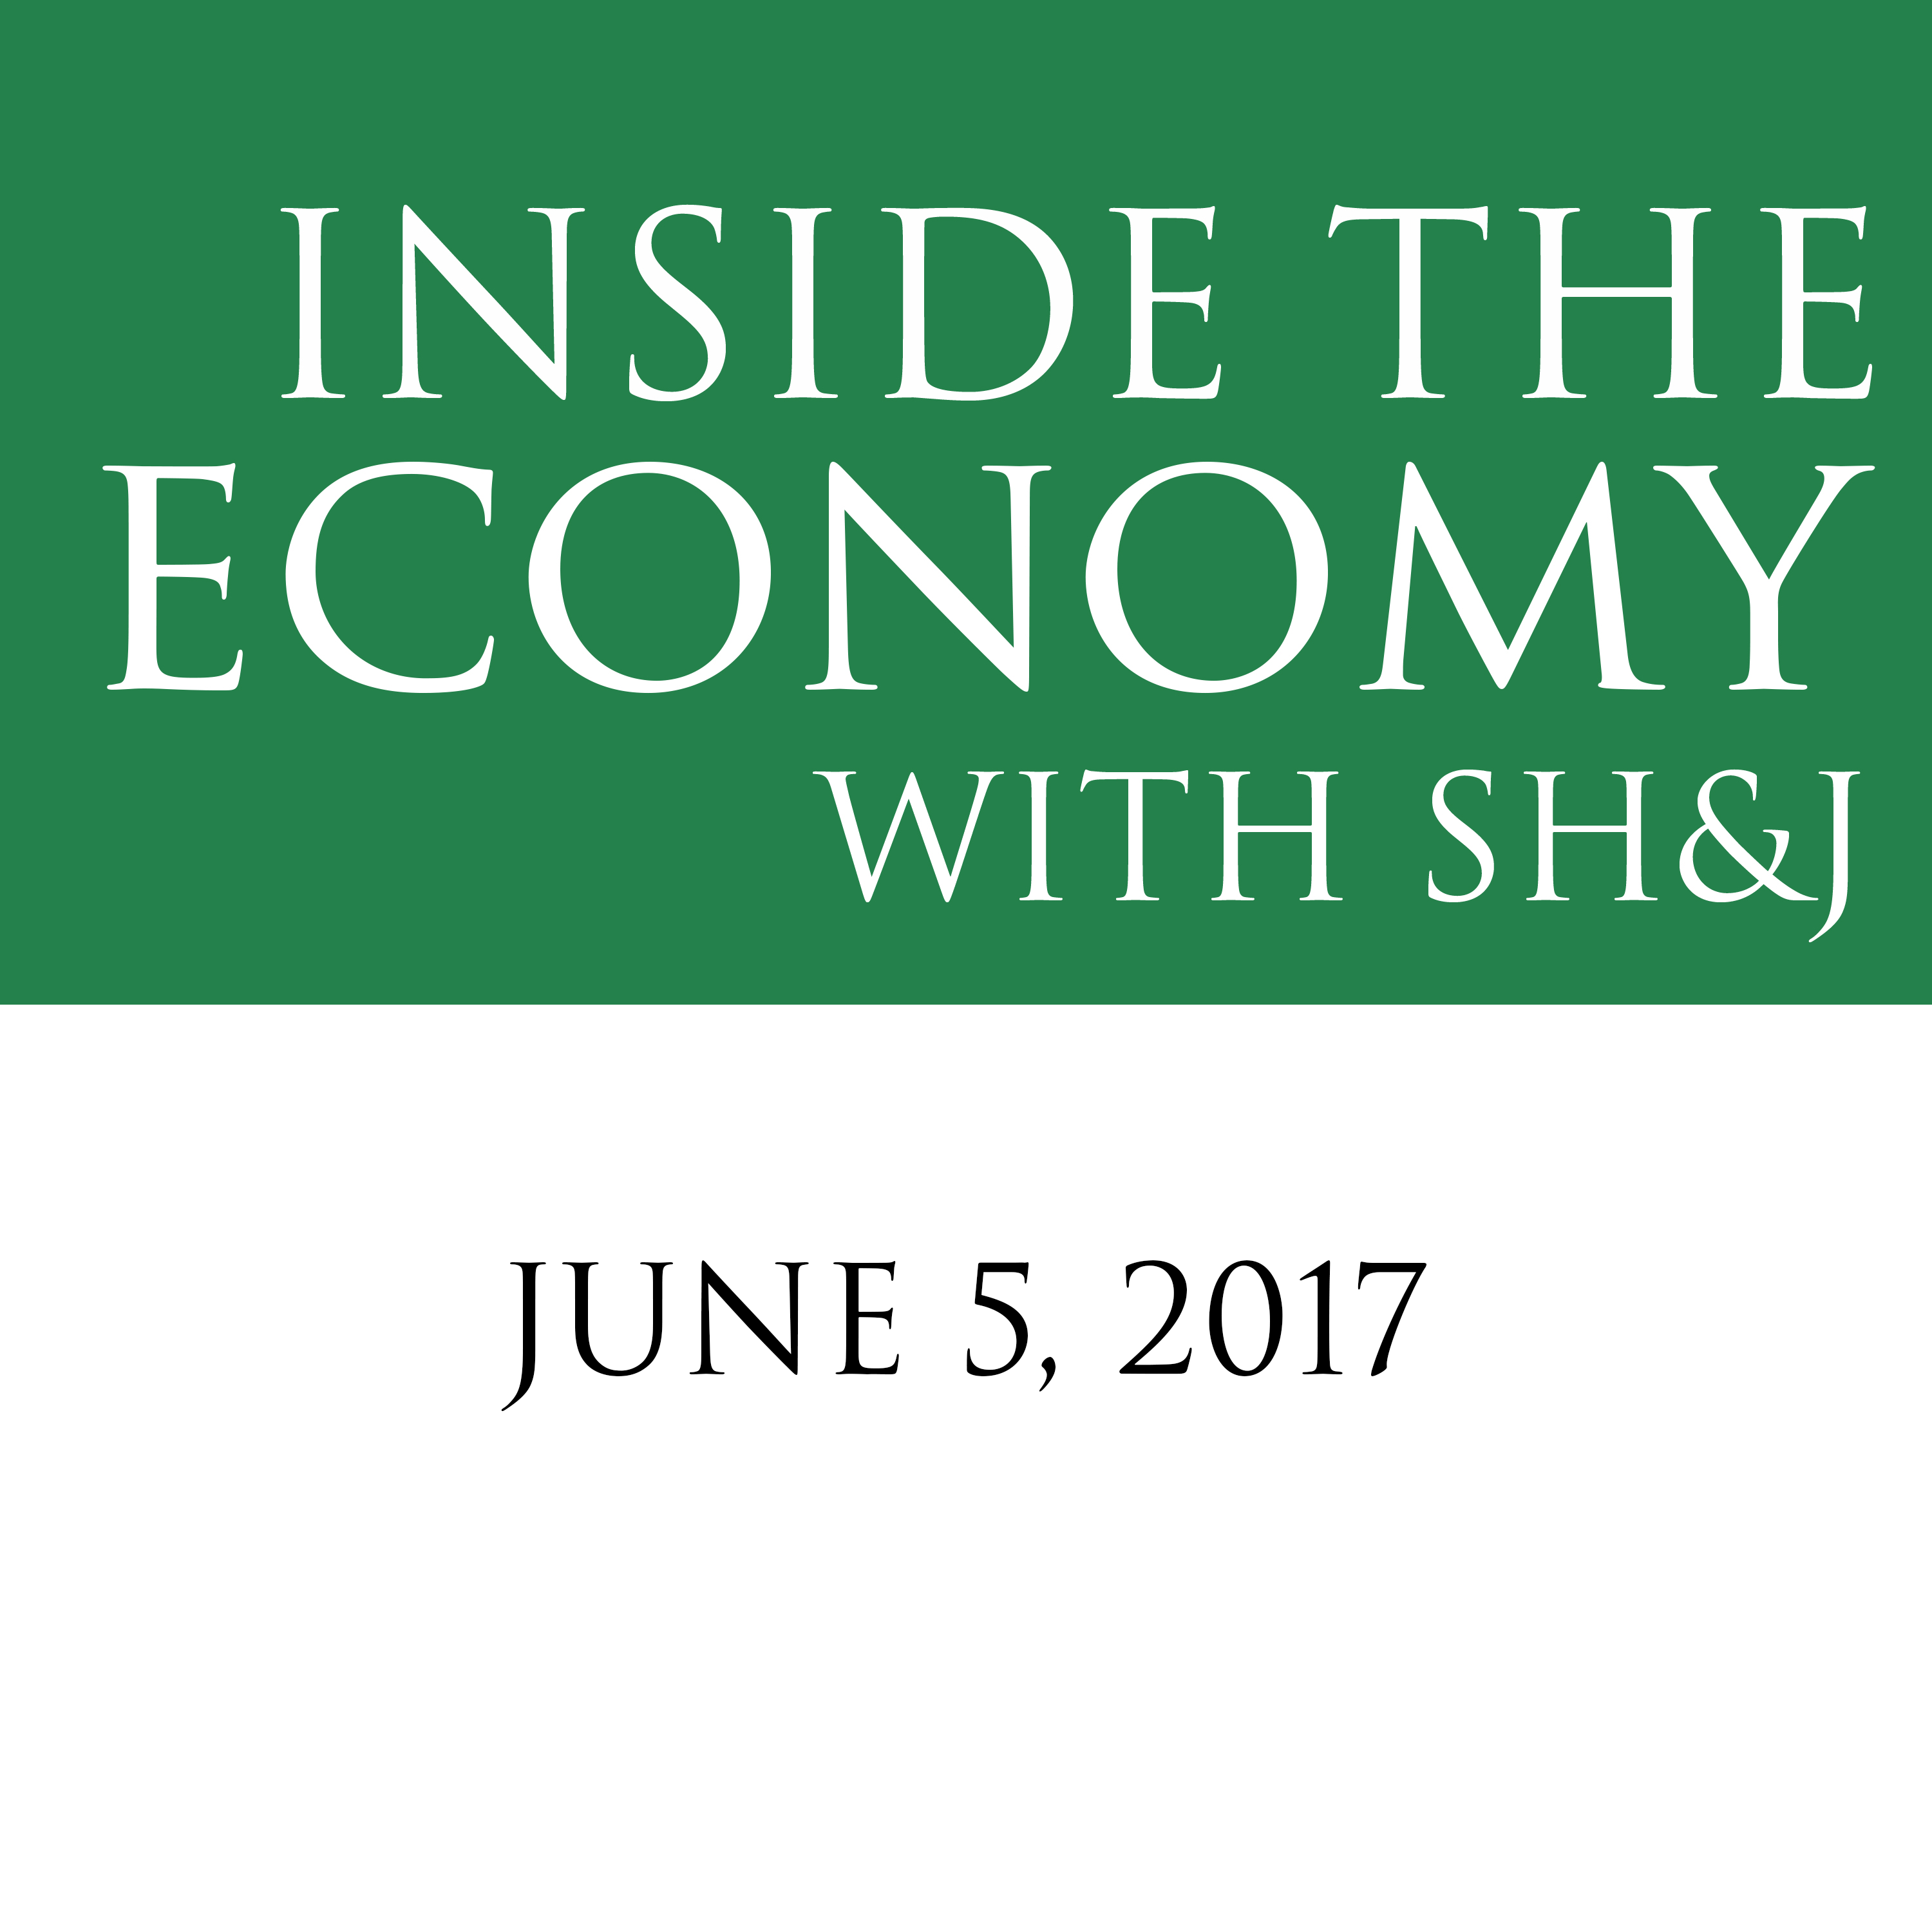 Reserve Rates, China’s Rating and Capital in Commercial Real Estate  --  Inside the Economy with SH&J